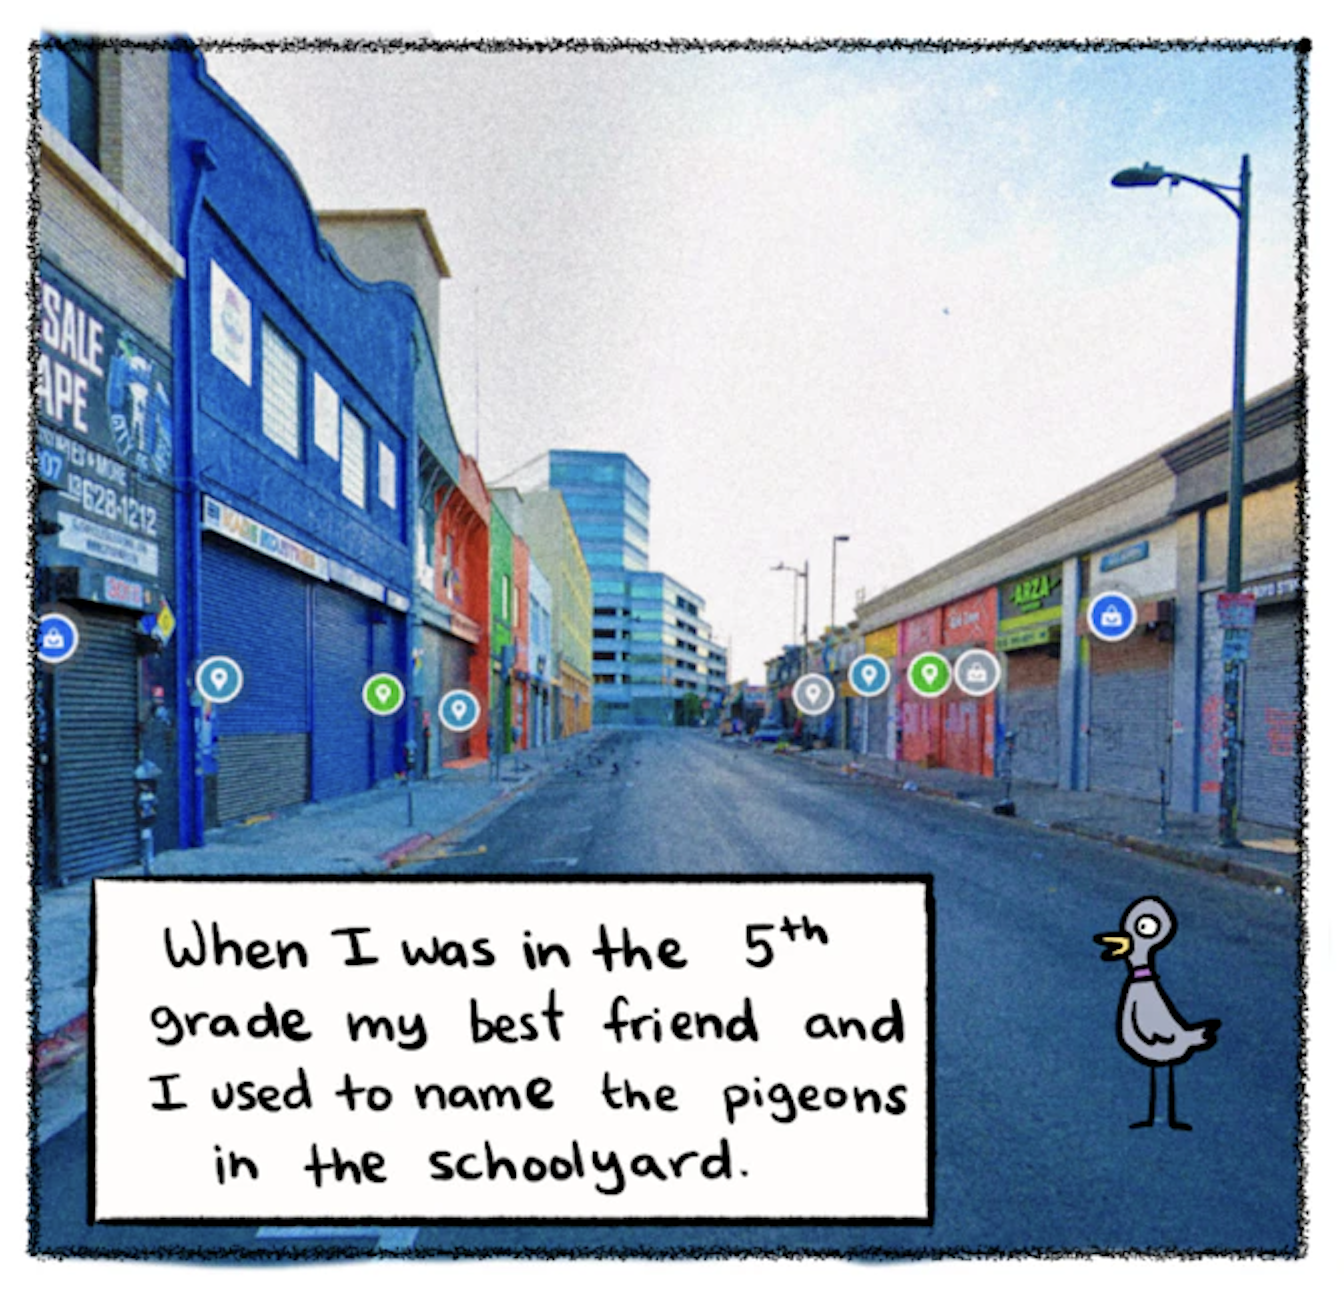 â€œWhen I was in the 5th grade my best friend and I used to name the pigeons in the schoolyard.â€ A brightly colored screenshot of a Google Maps street view image of a city street, with a cartoon pigeon imposed on it to be part of the scene.